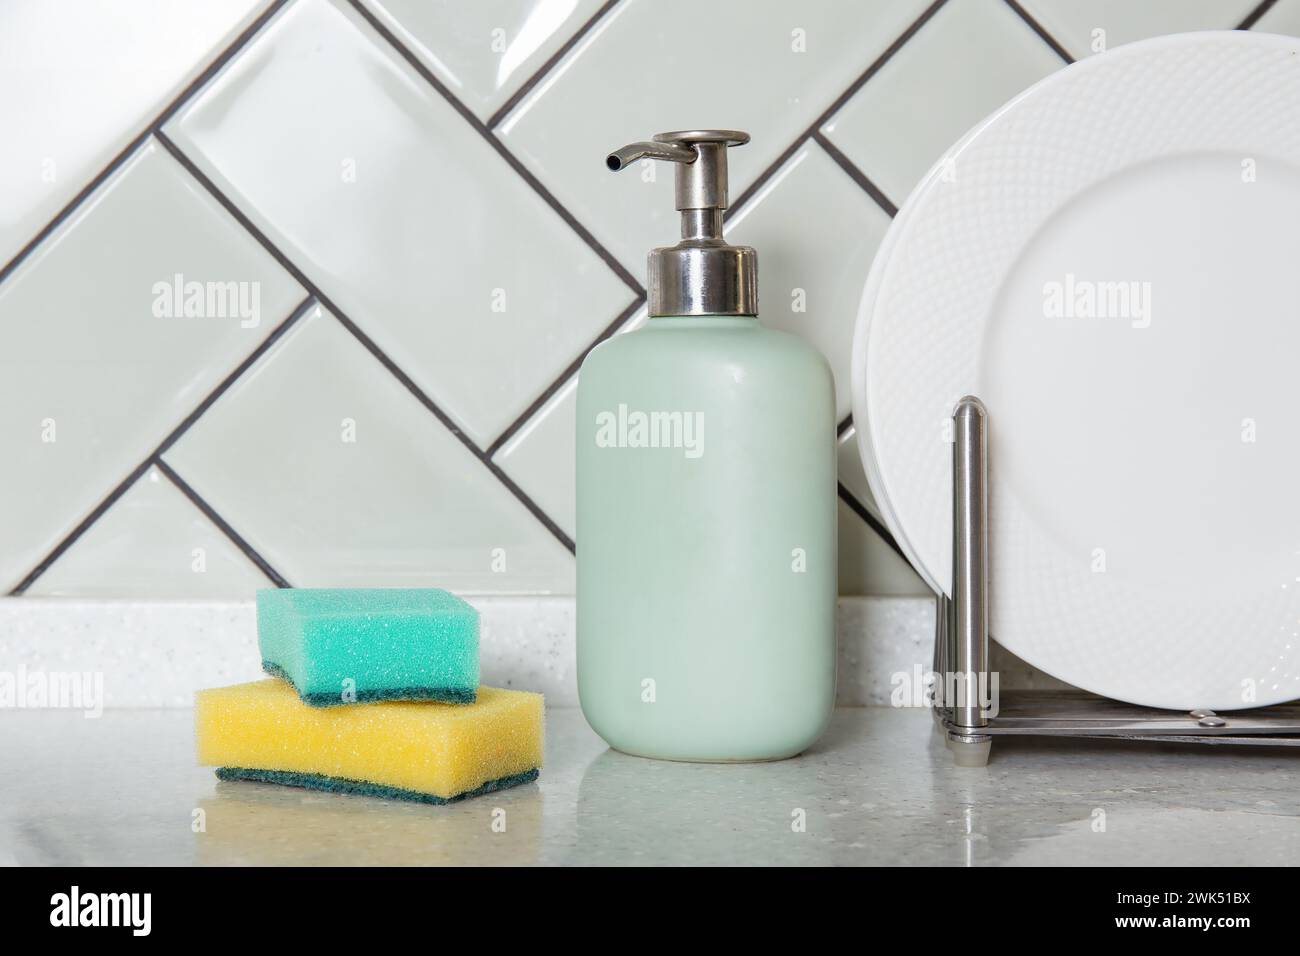 Soap dispenser and sponges beside clean dishes or white plates. Home hygiene and dish washing, home decor Stock Photo